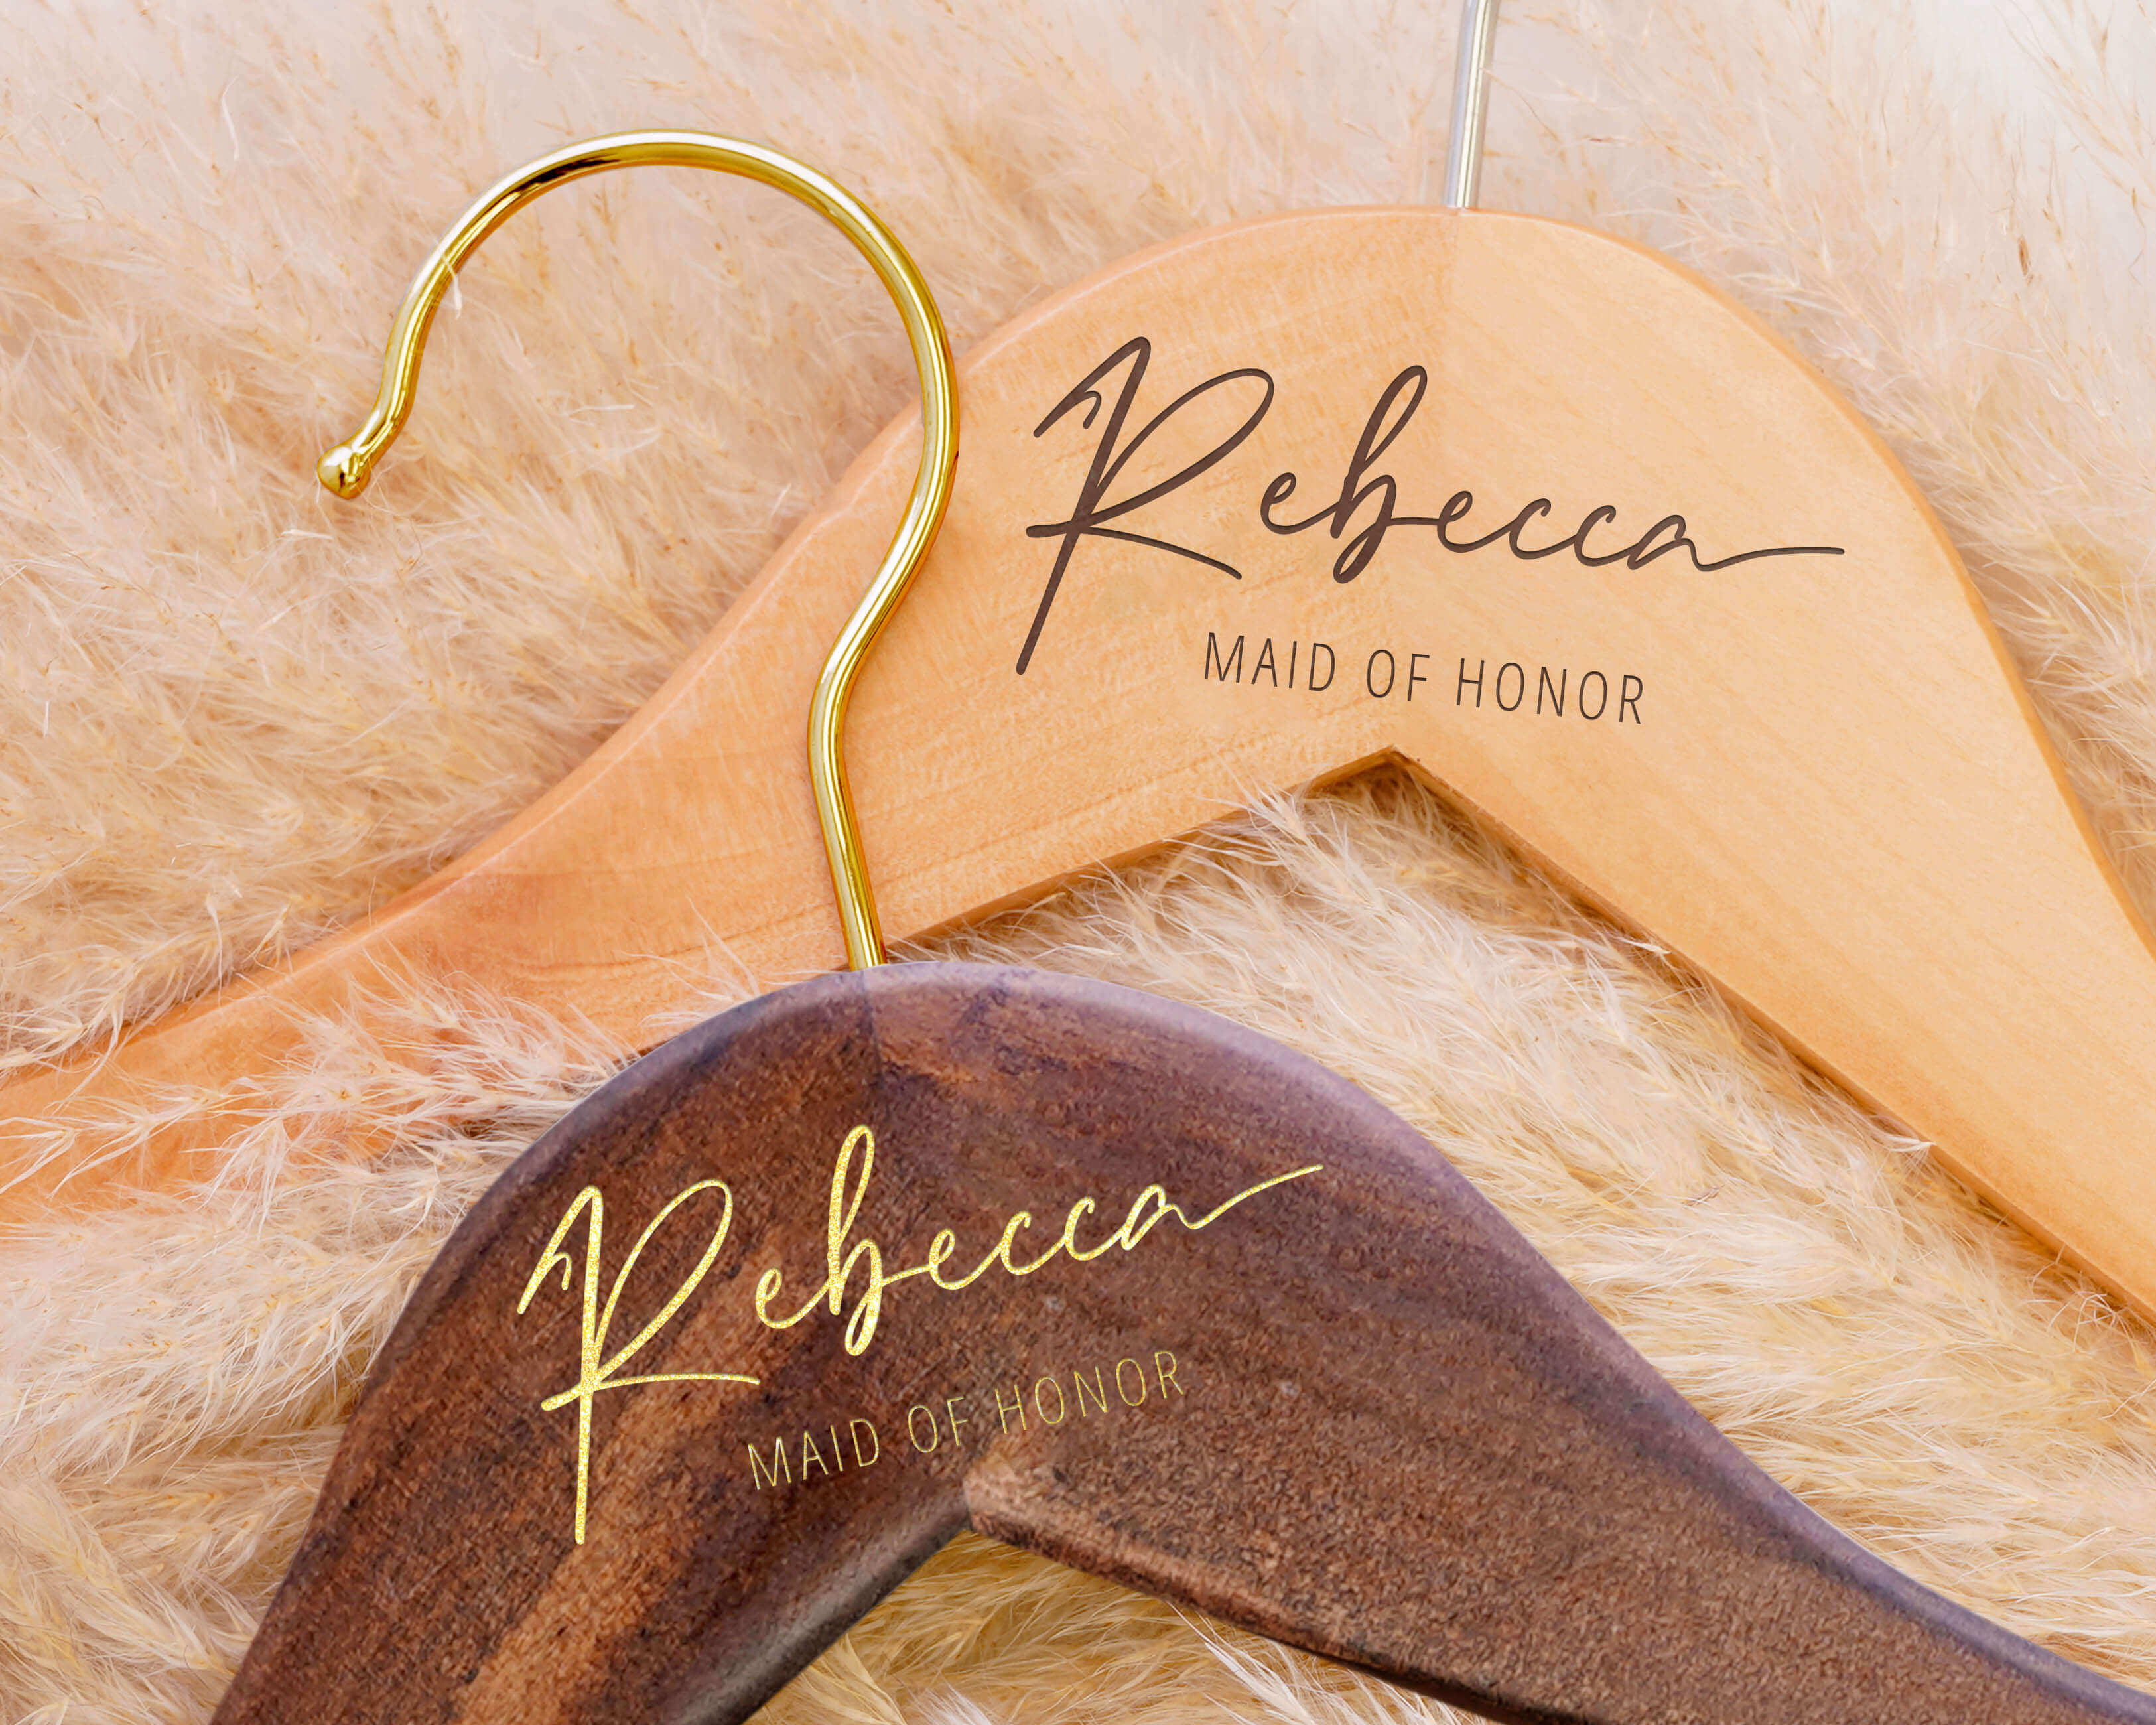 Wedding Dress Hanger - Custom Gold Hook Wedding Dress Hangers with personalized name and wedding role.